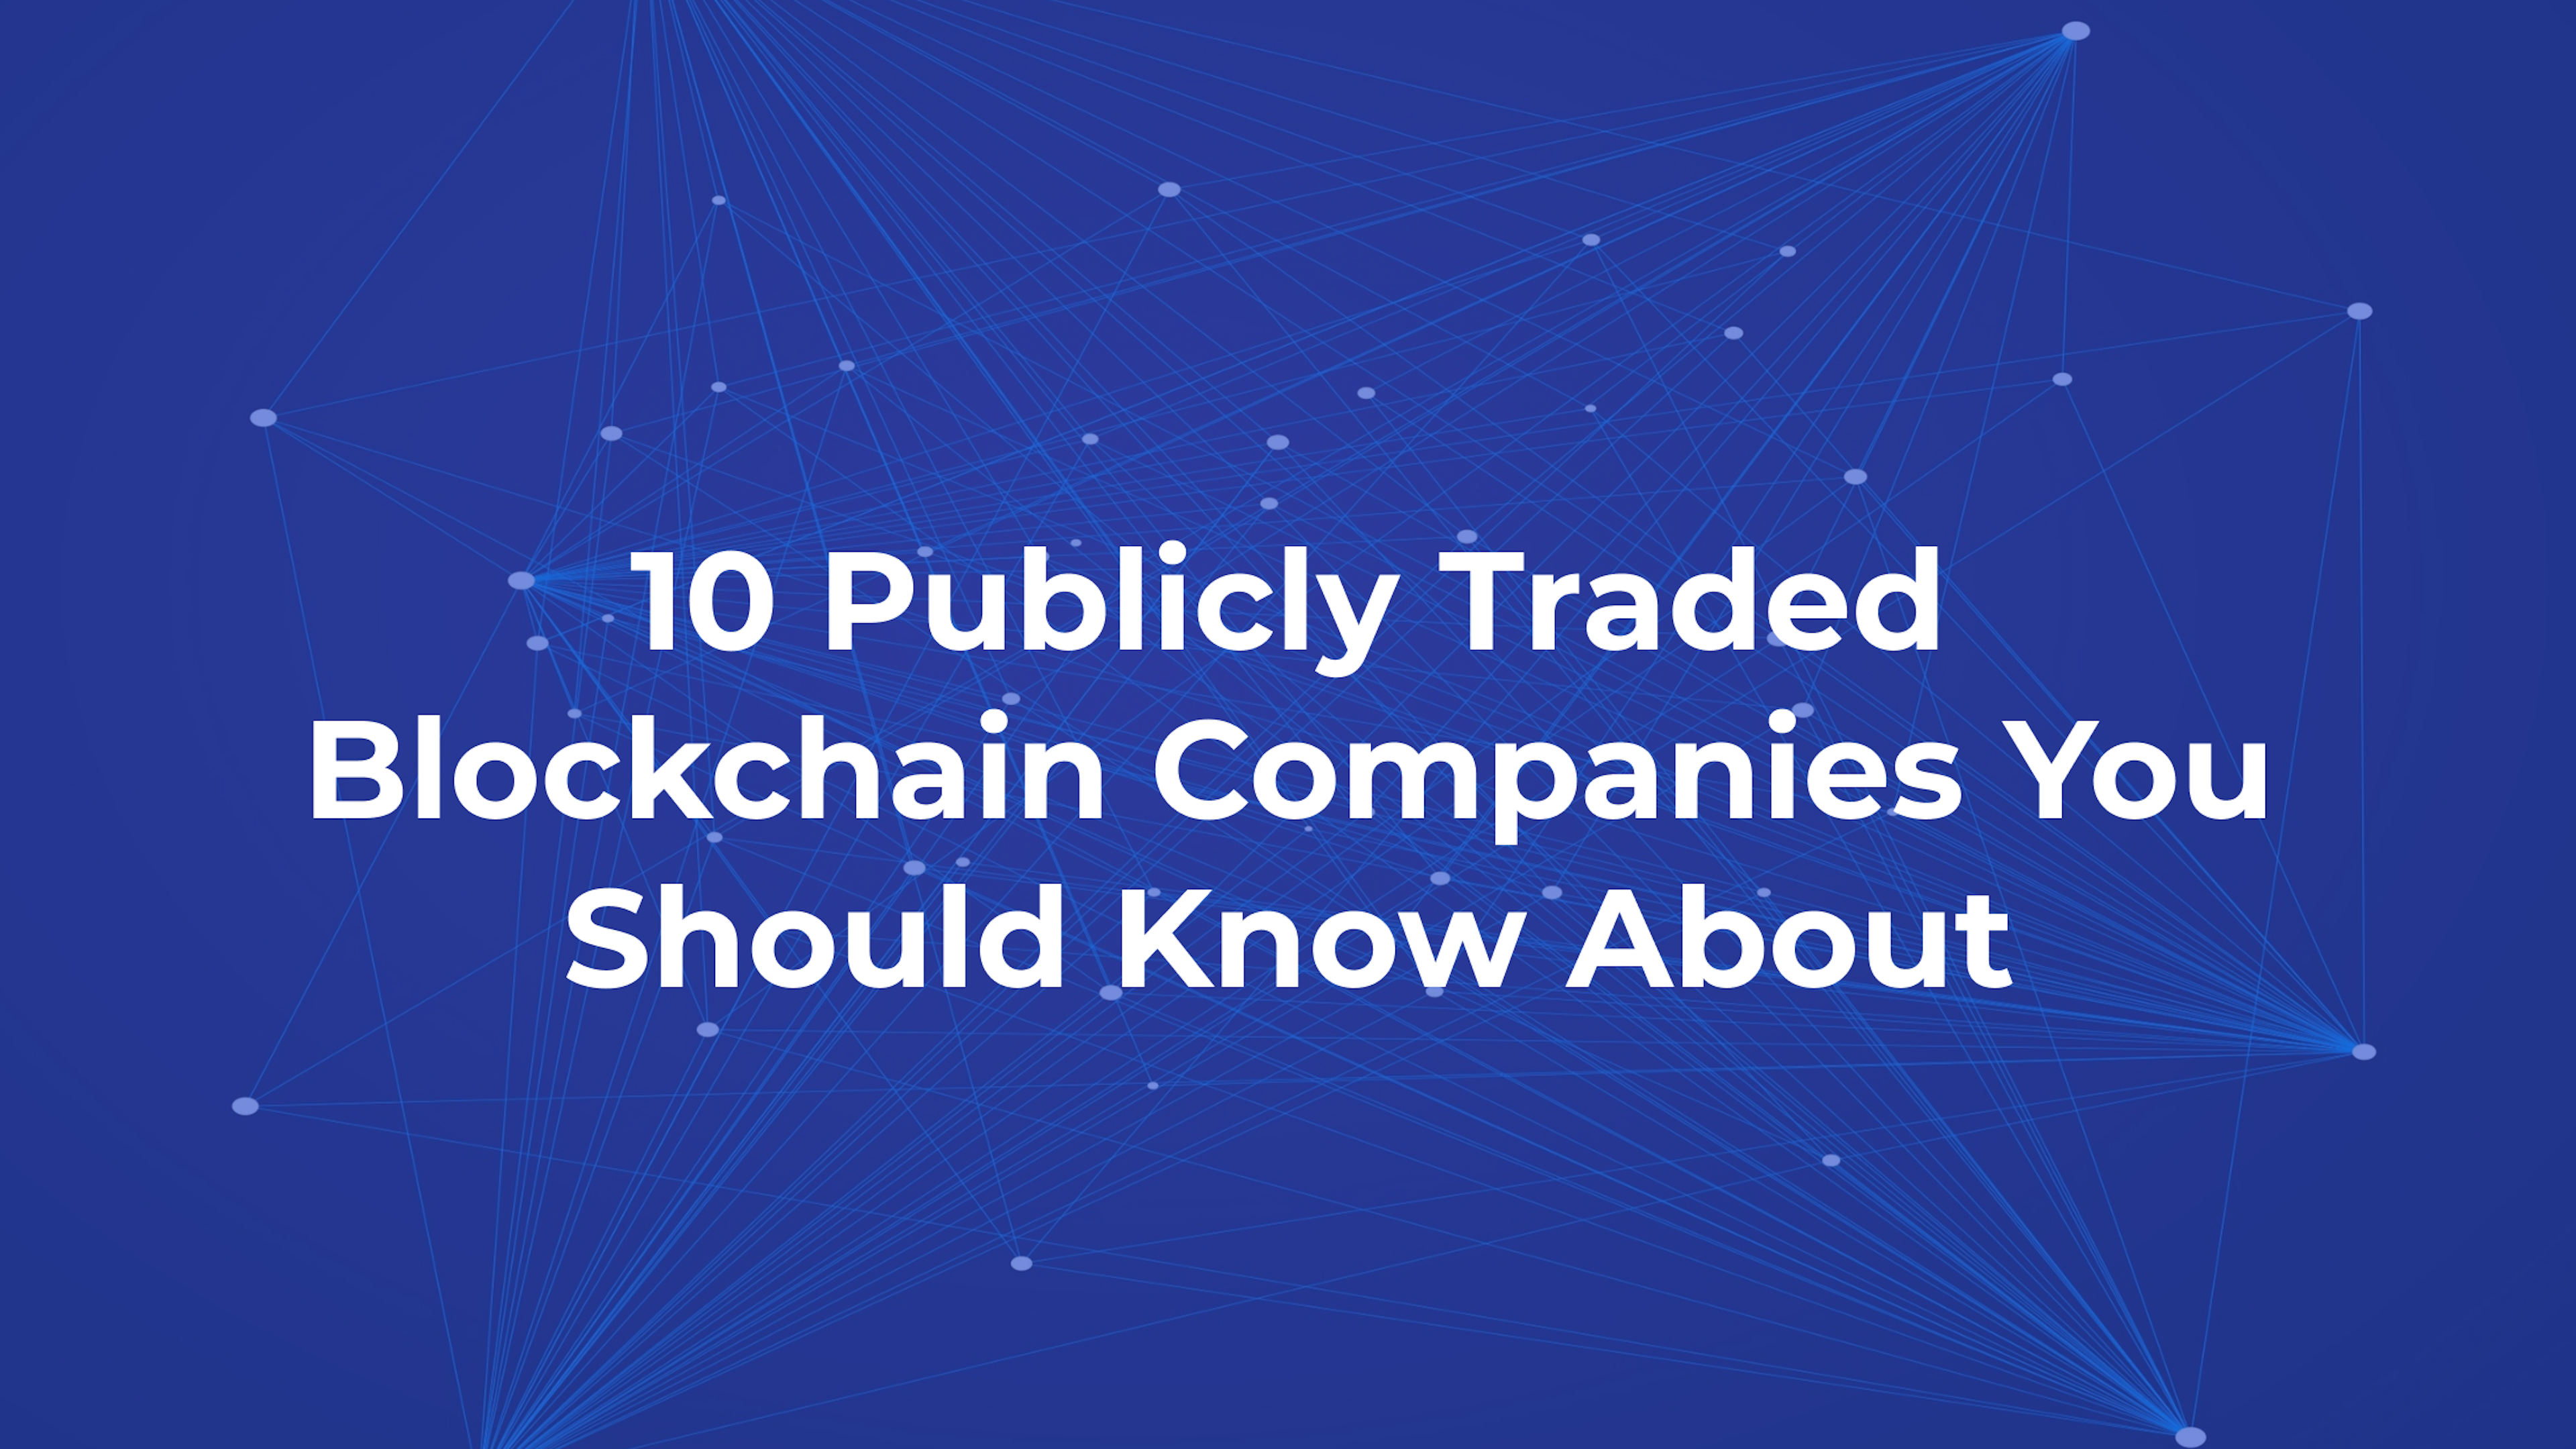 10 Publicly Traded Blockchain Companies You Should Know About | Blockchain Works